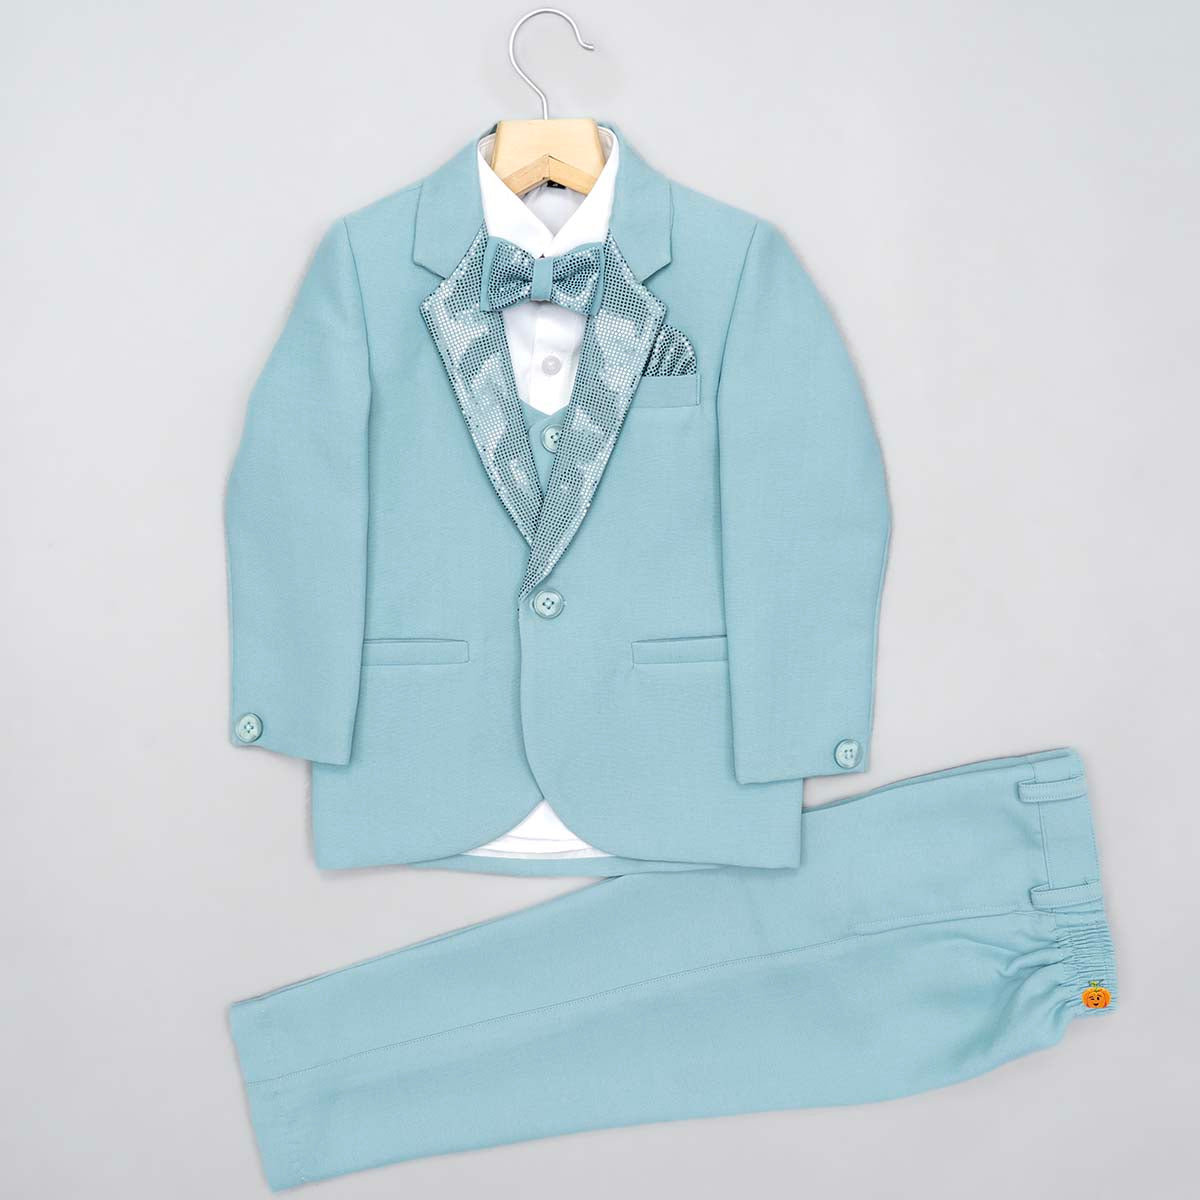 Gentleman Little Boys Tuxedos Three-piece Suits Kids Wasit Coat + Suit  Jacket + Suit Pants Outfits 1-9 Years | Wish